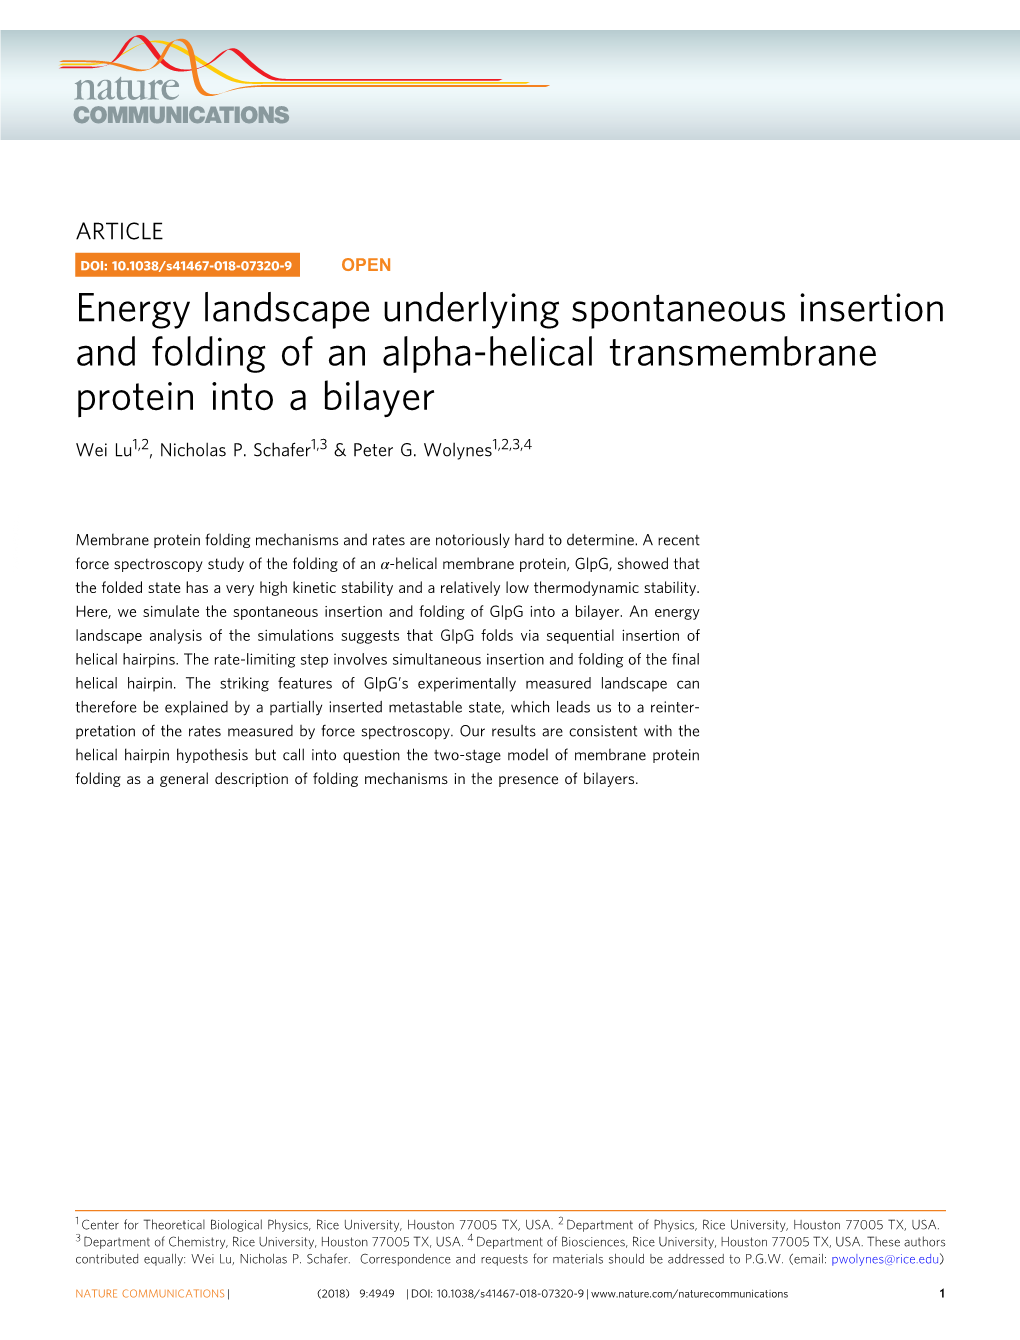 Energy Landscape Underlying Spontaneous Insertion and Folding of an Alpha-Helical Transmembrane Protein Into a Bilayer